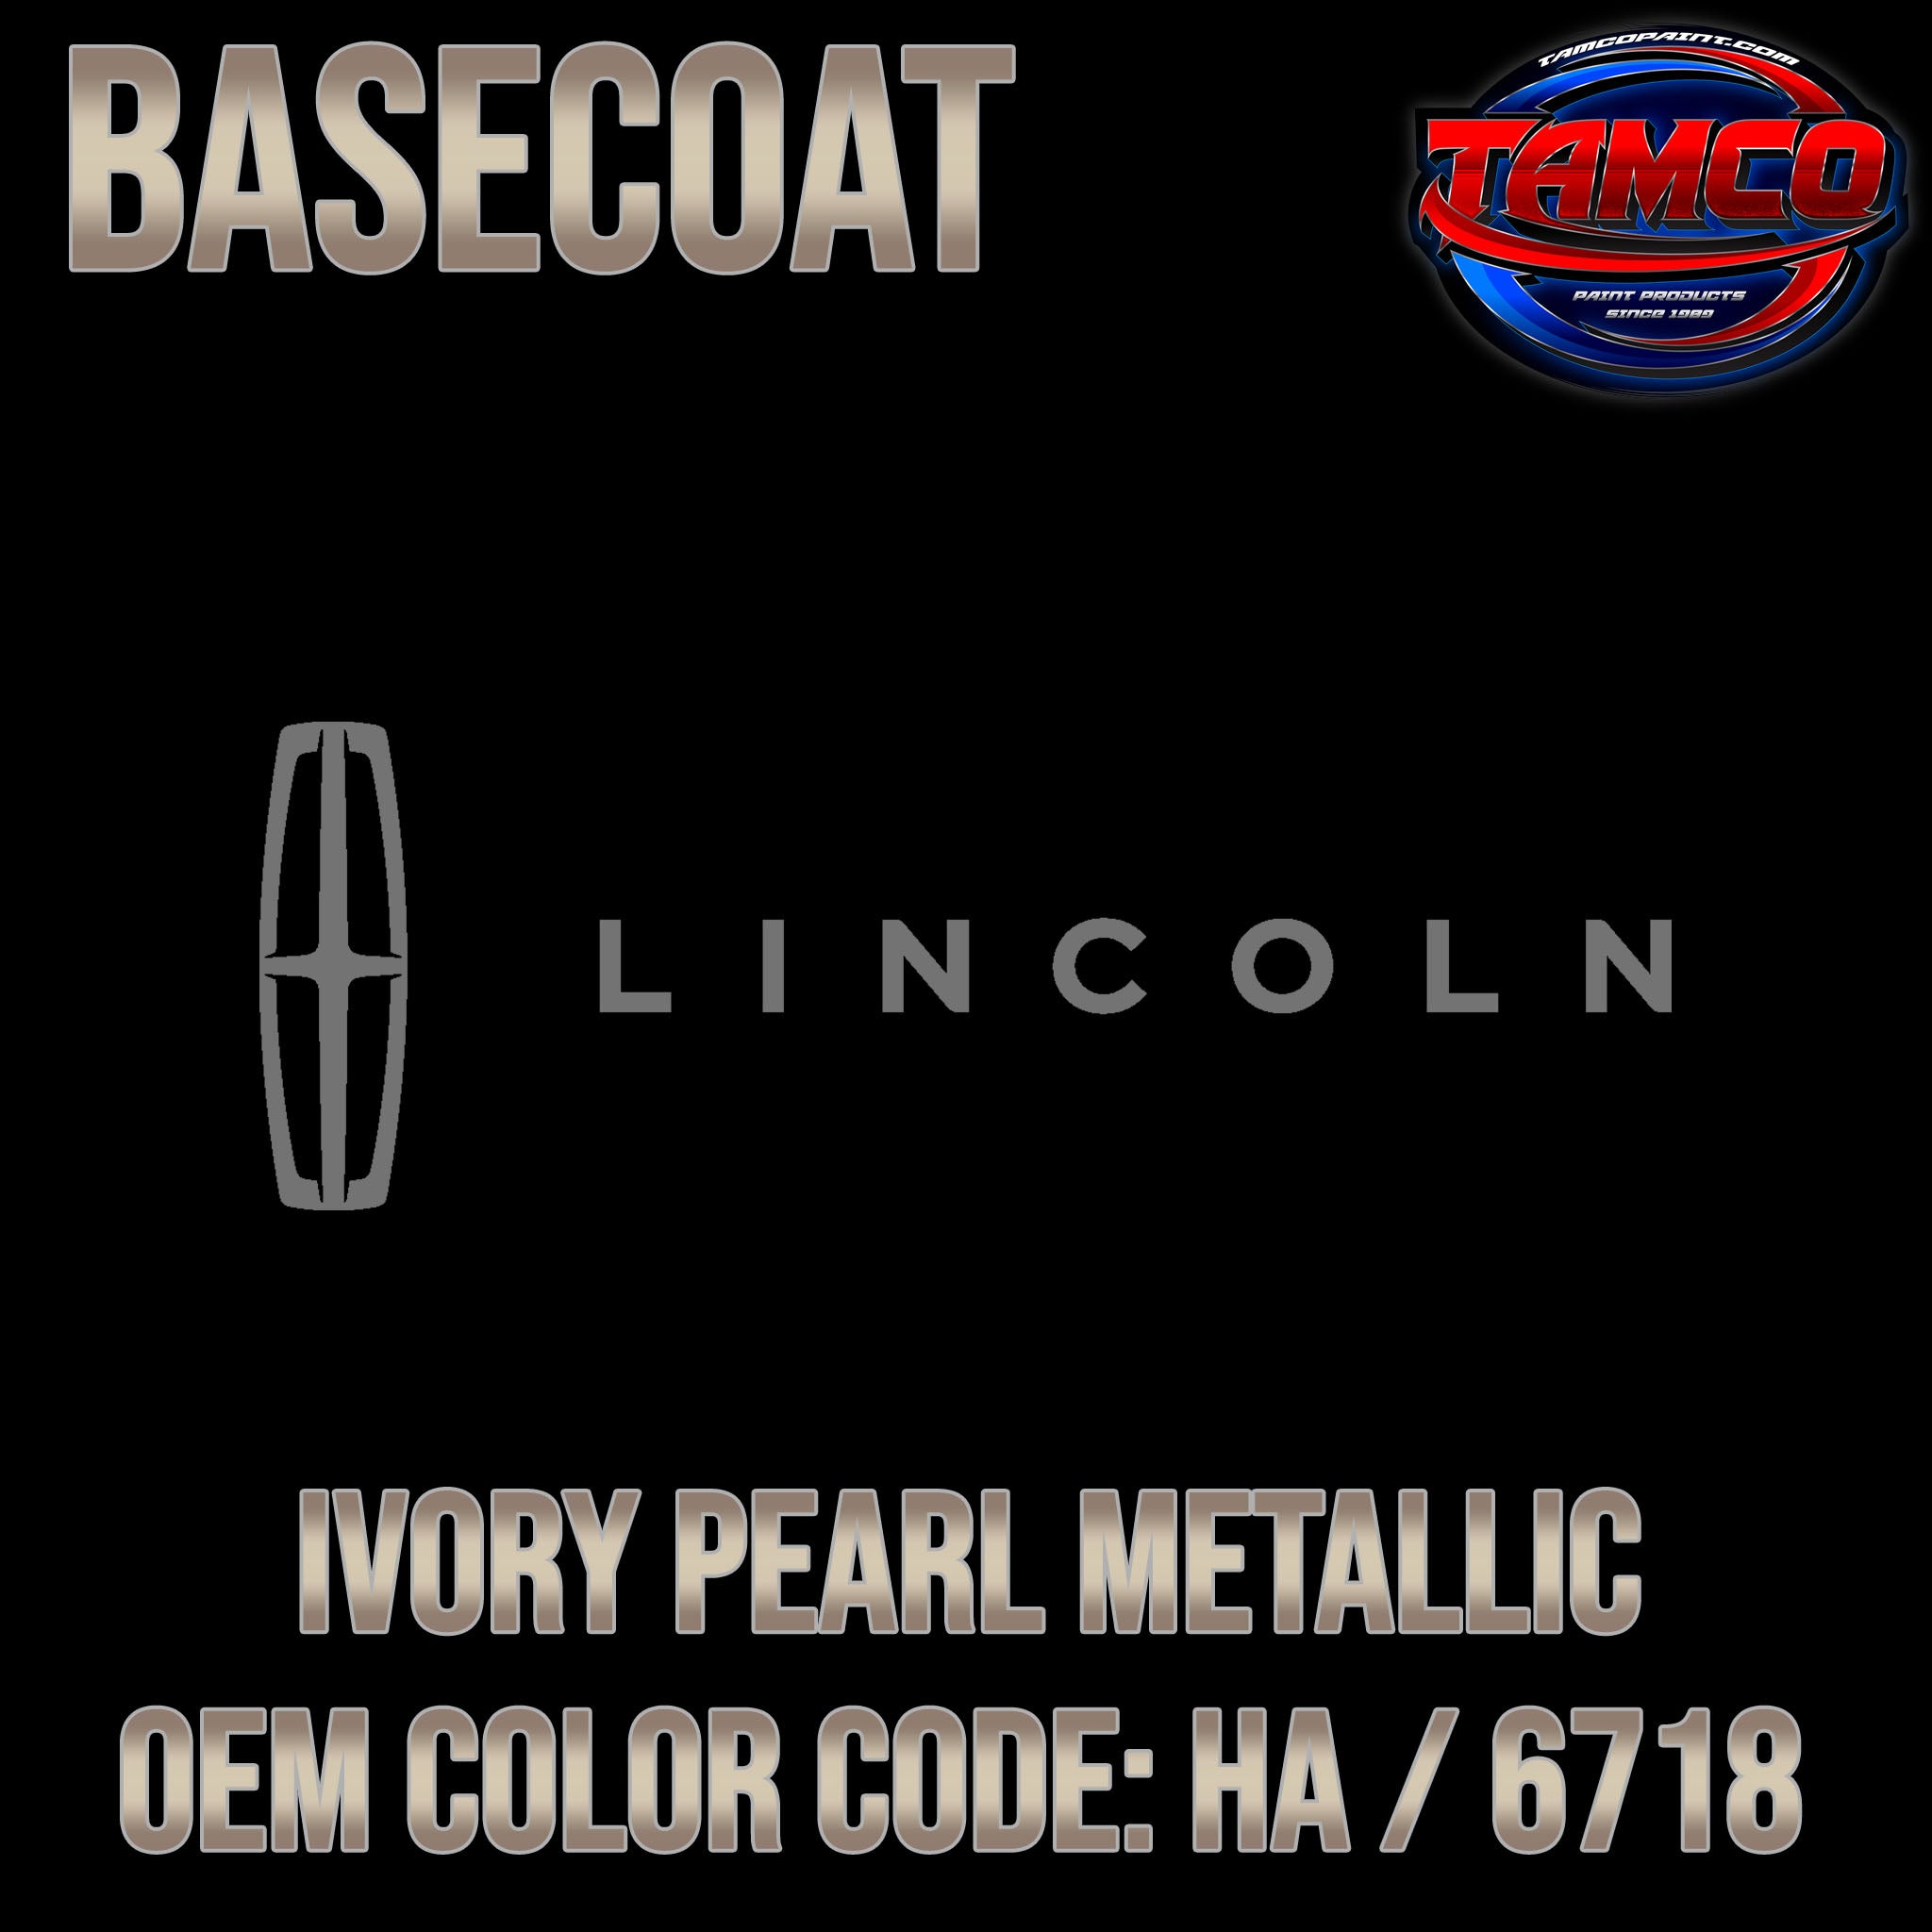 Ivory Pearl  Tamco Paint Products